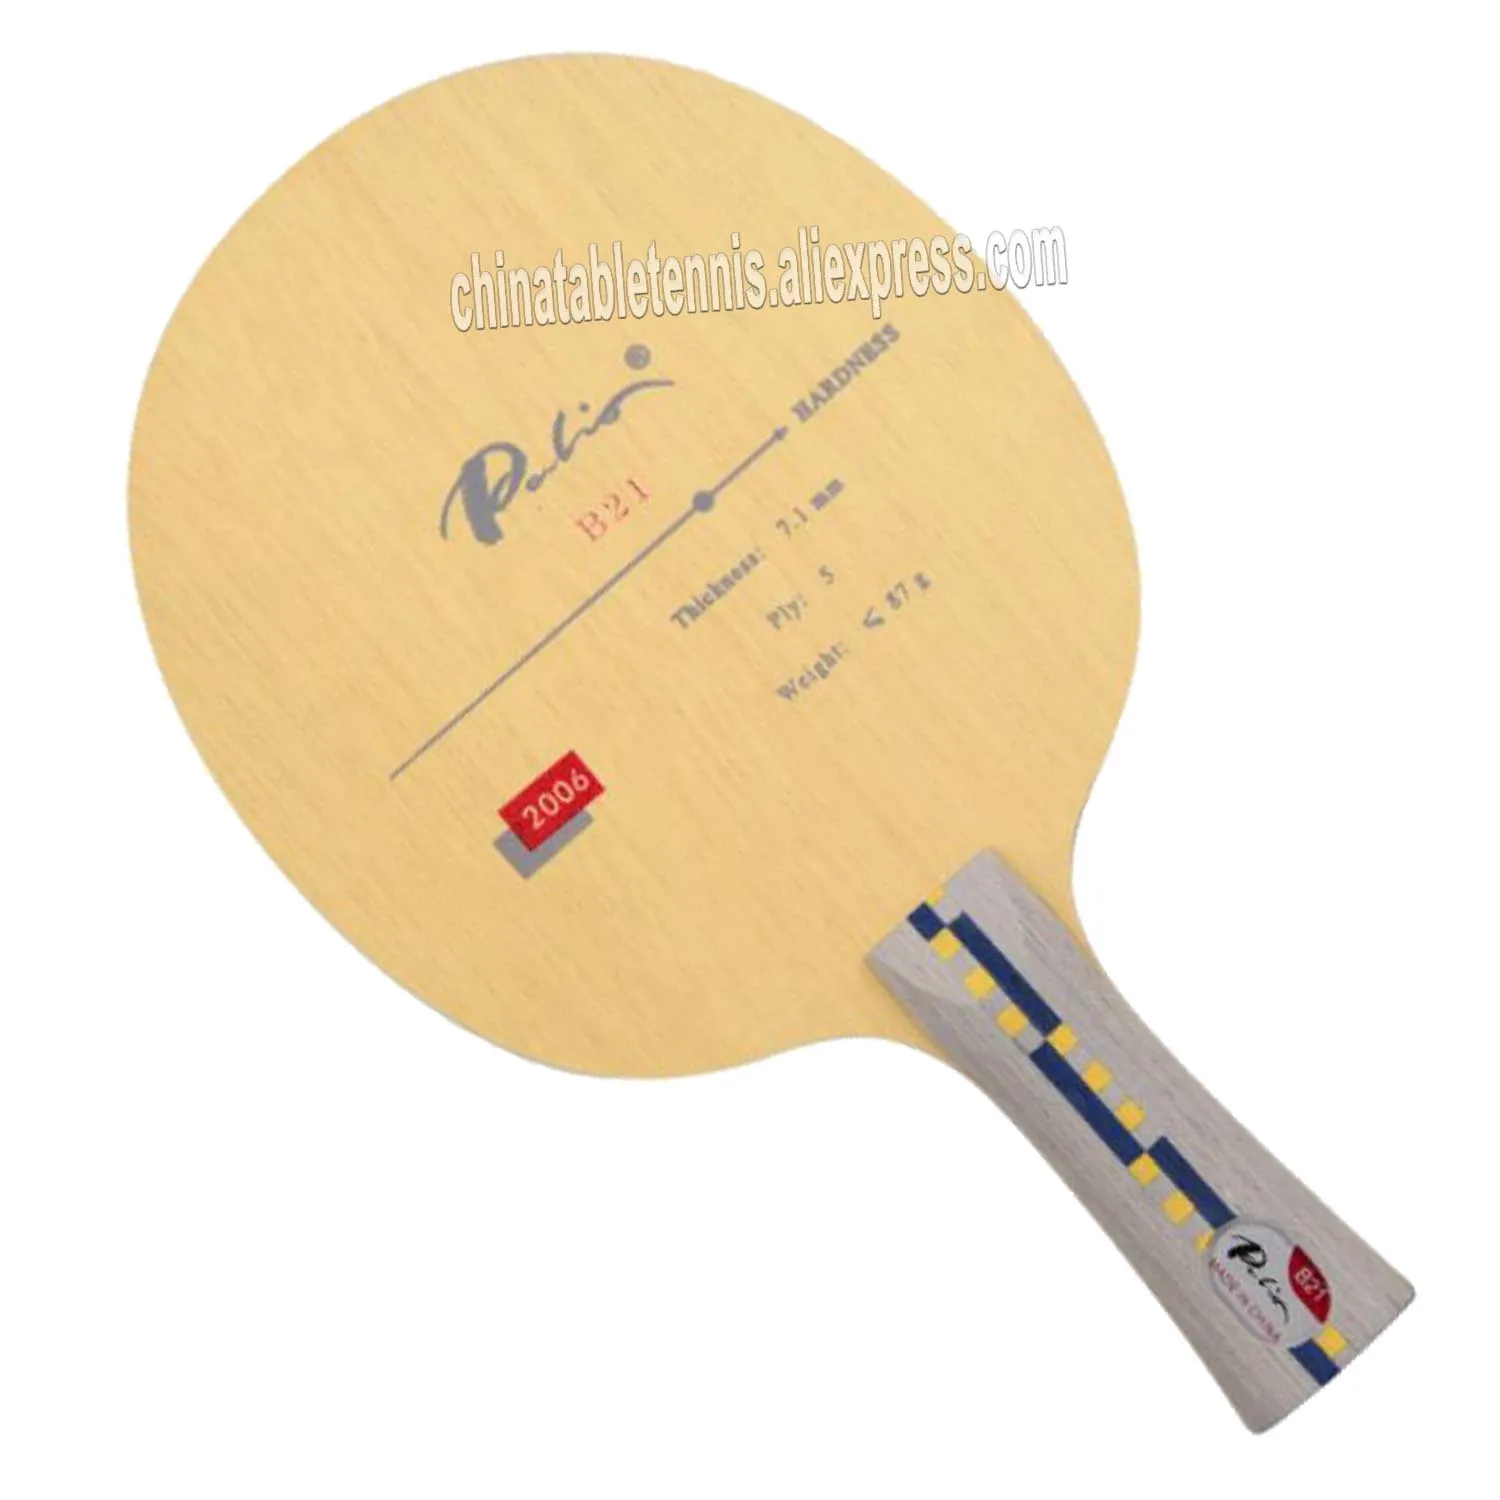 

Palio official B-21 B21 B 21 table tennis blade 5 ply pure wood allround for table tennis racquet game ping pong game